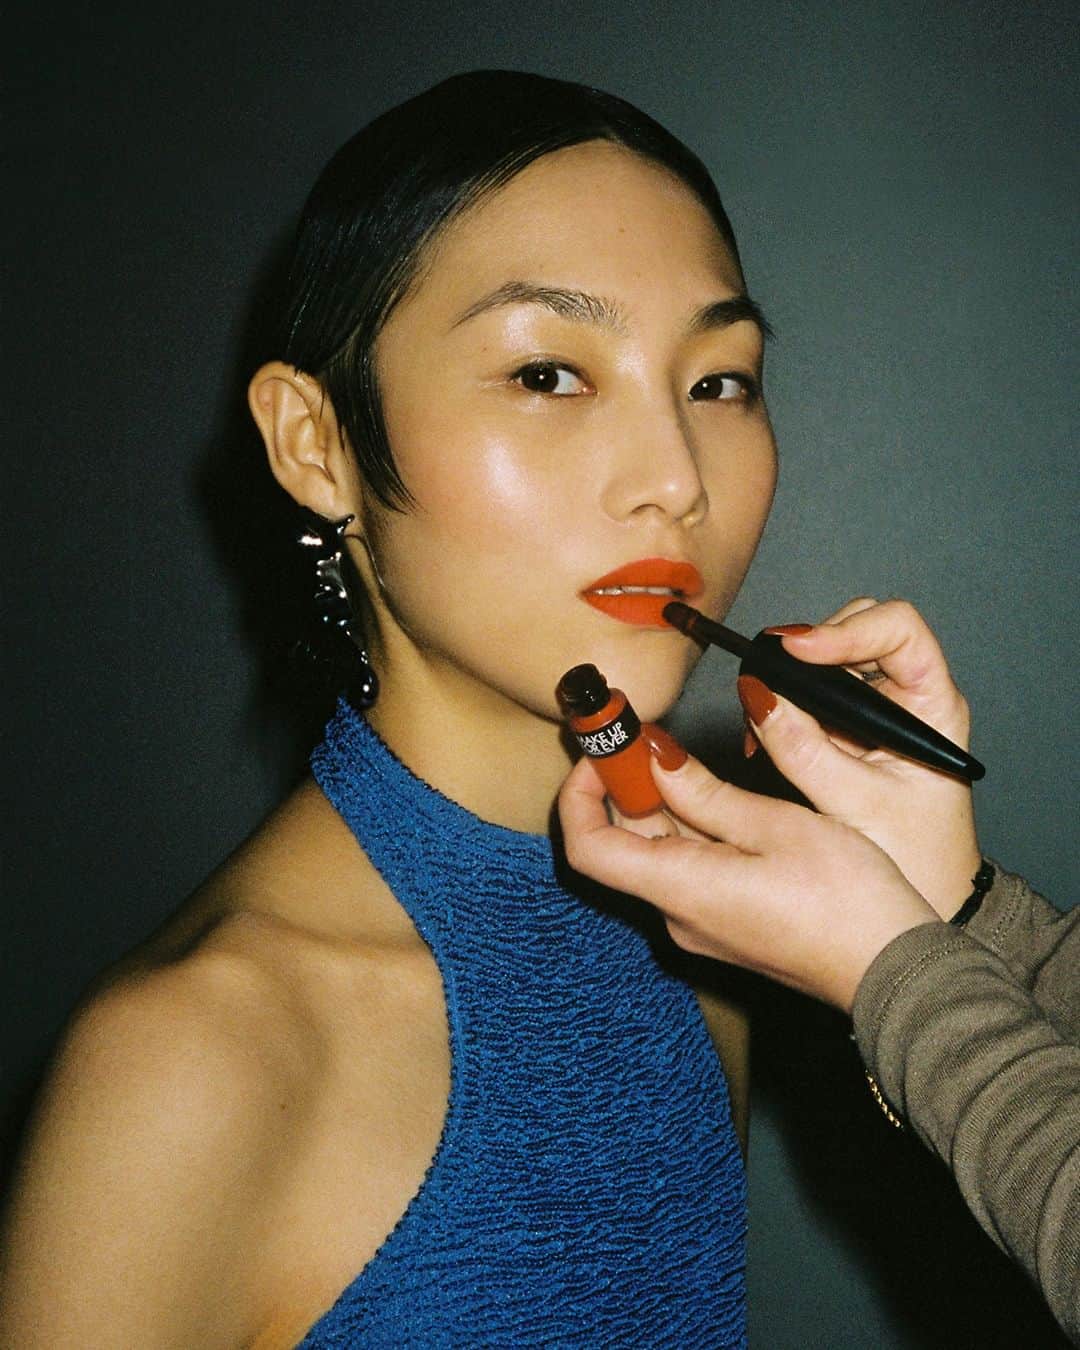 MAKE UP FOR EVER OFFICIALのインスタグラム：「Behind the scenes of our #RougeArtistForEverMatte campaign.  A powerful matte finish in one stroke delivered by a unique applicator inspired by an artist's lip brush.  #MakeItLast #MAKEUPFOREVER」